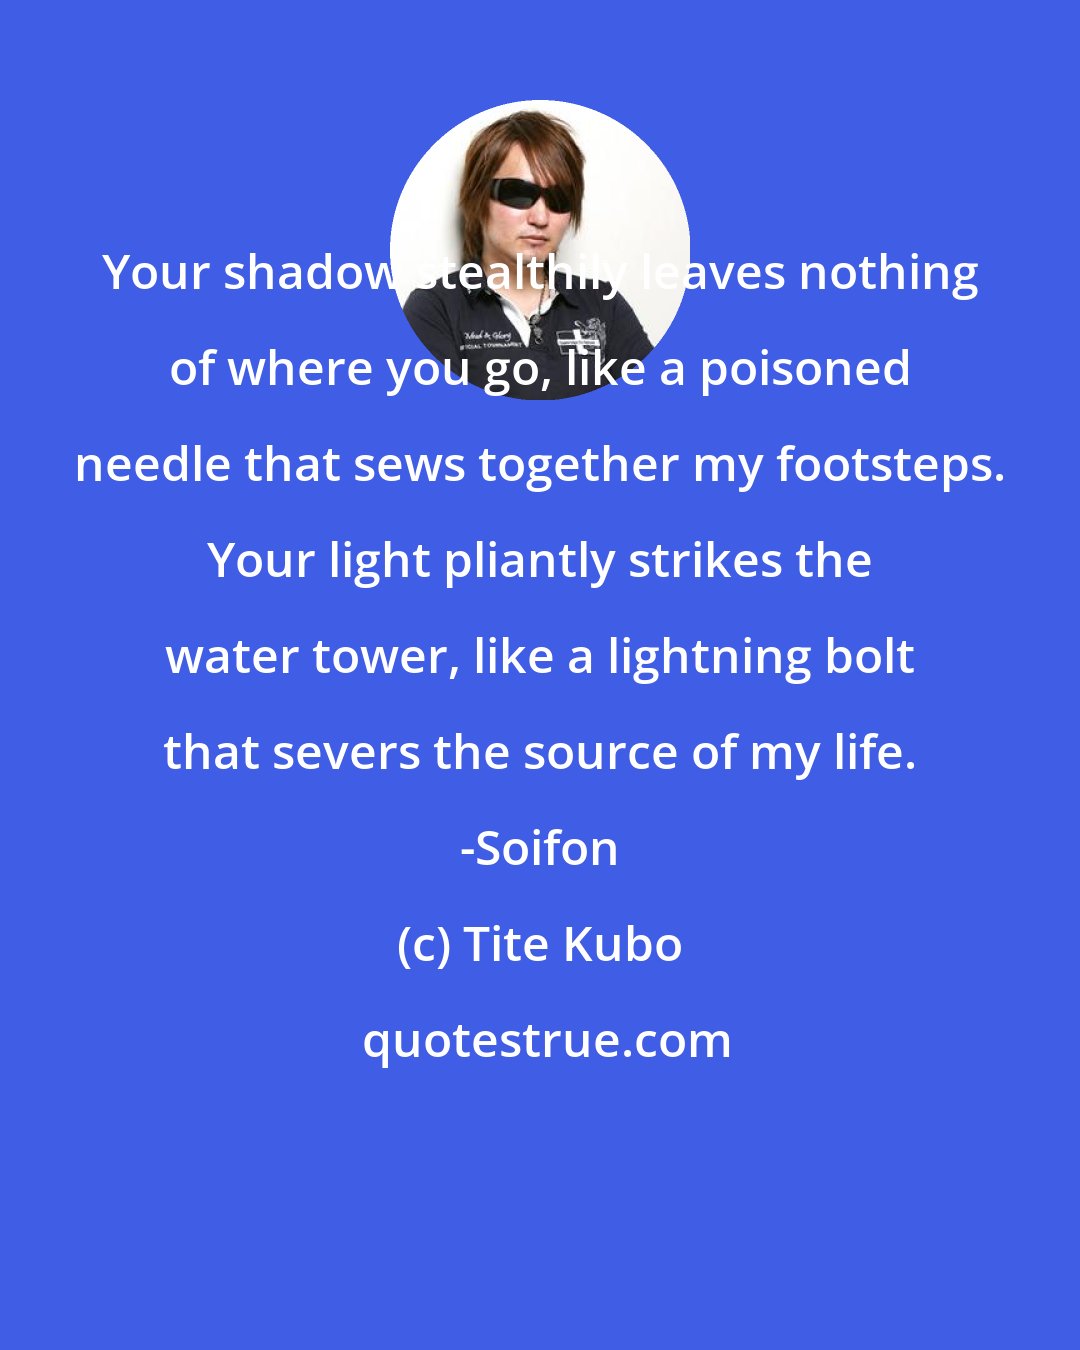 Tite Kubo: Your shadow stealthily leaves nothing of where you go, like a poisoned needle that sews together my footsteps. Your light pliantly strikes the water tower, like a lightning bolt that severs the source of my life. -Soifon